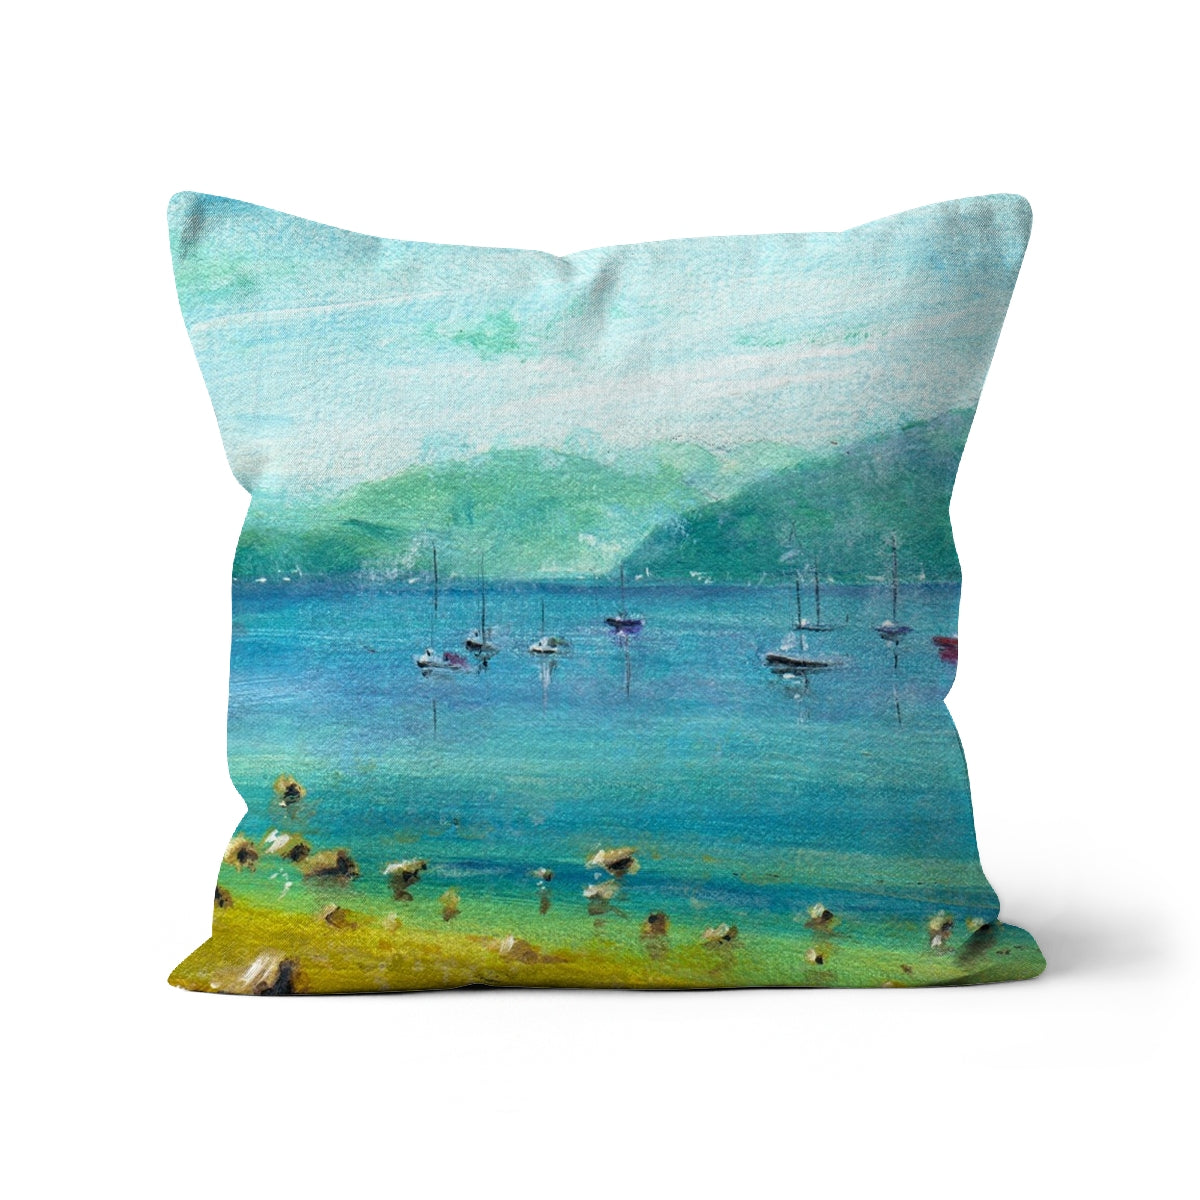 A Clyde Summer Day Art Gifts Cushion-Cushions-River Clyde Art Gallery-Linen-12"x12"-Paintings, Prints, Homeware, Art Gifts From Scotland By Scottish Artist Kevin Hunter